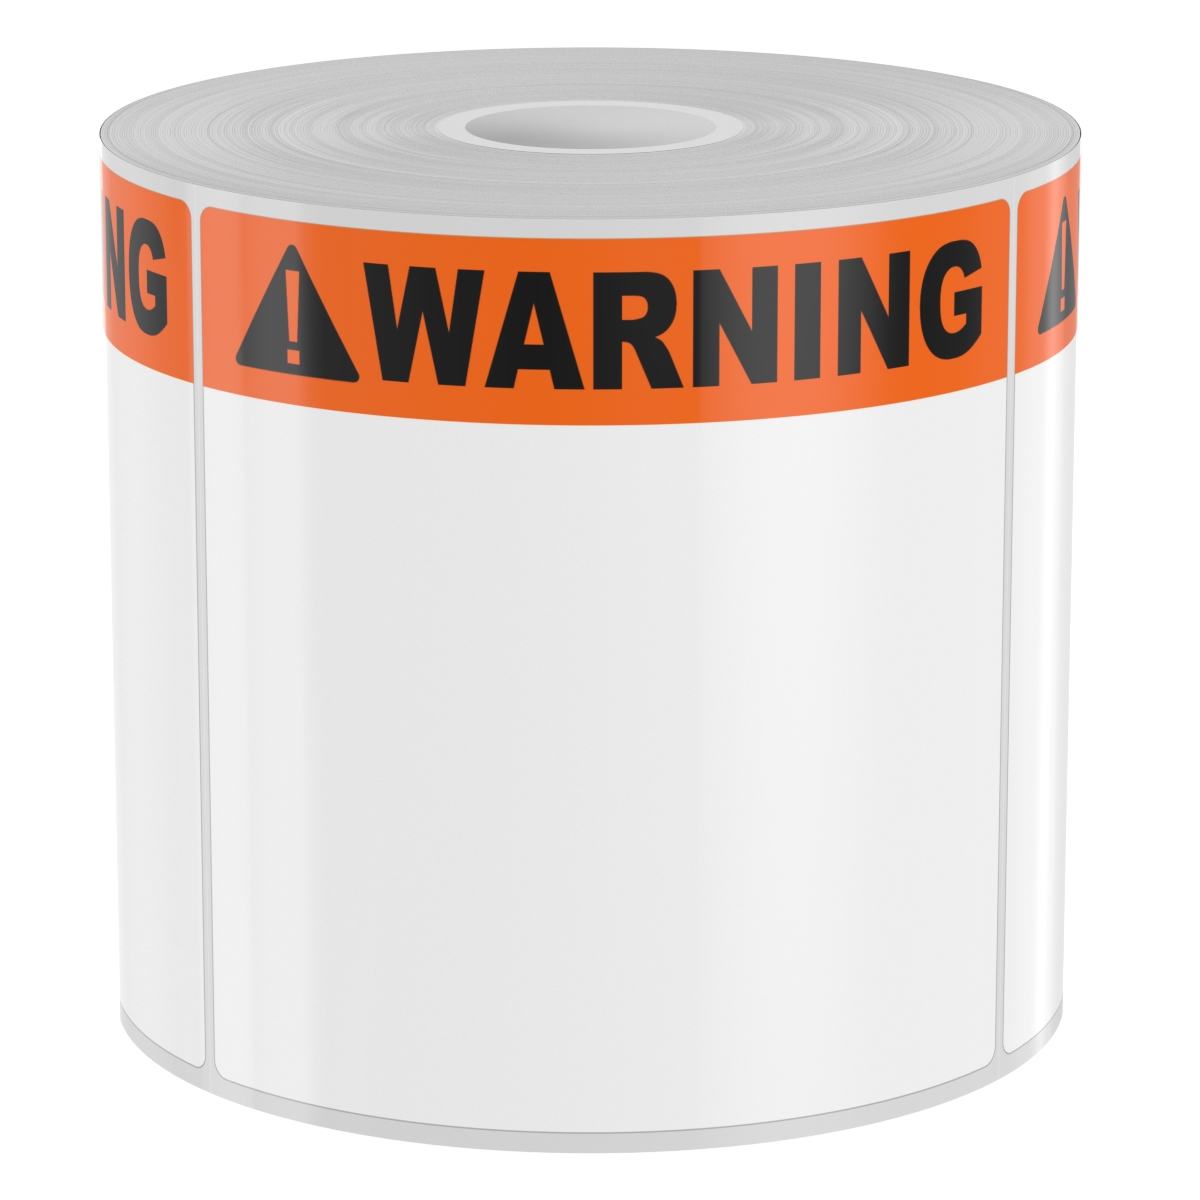 250 4in x 4in High-Performance Orange Band with Black Warning